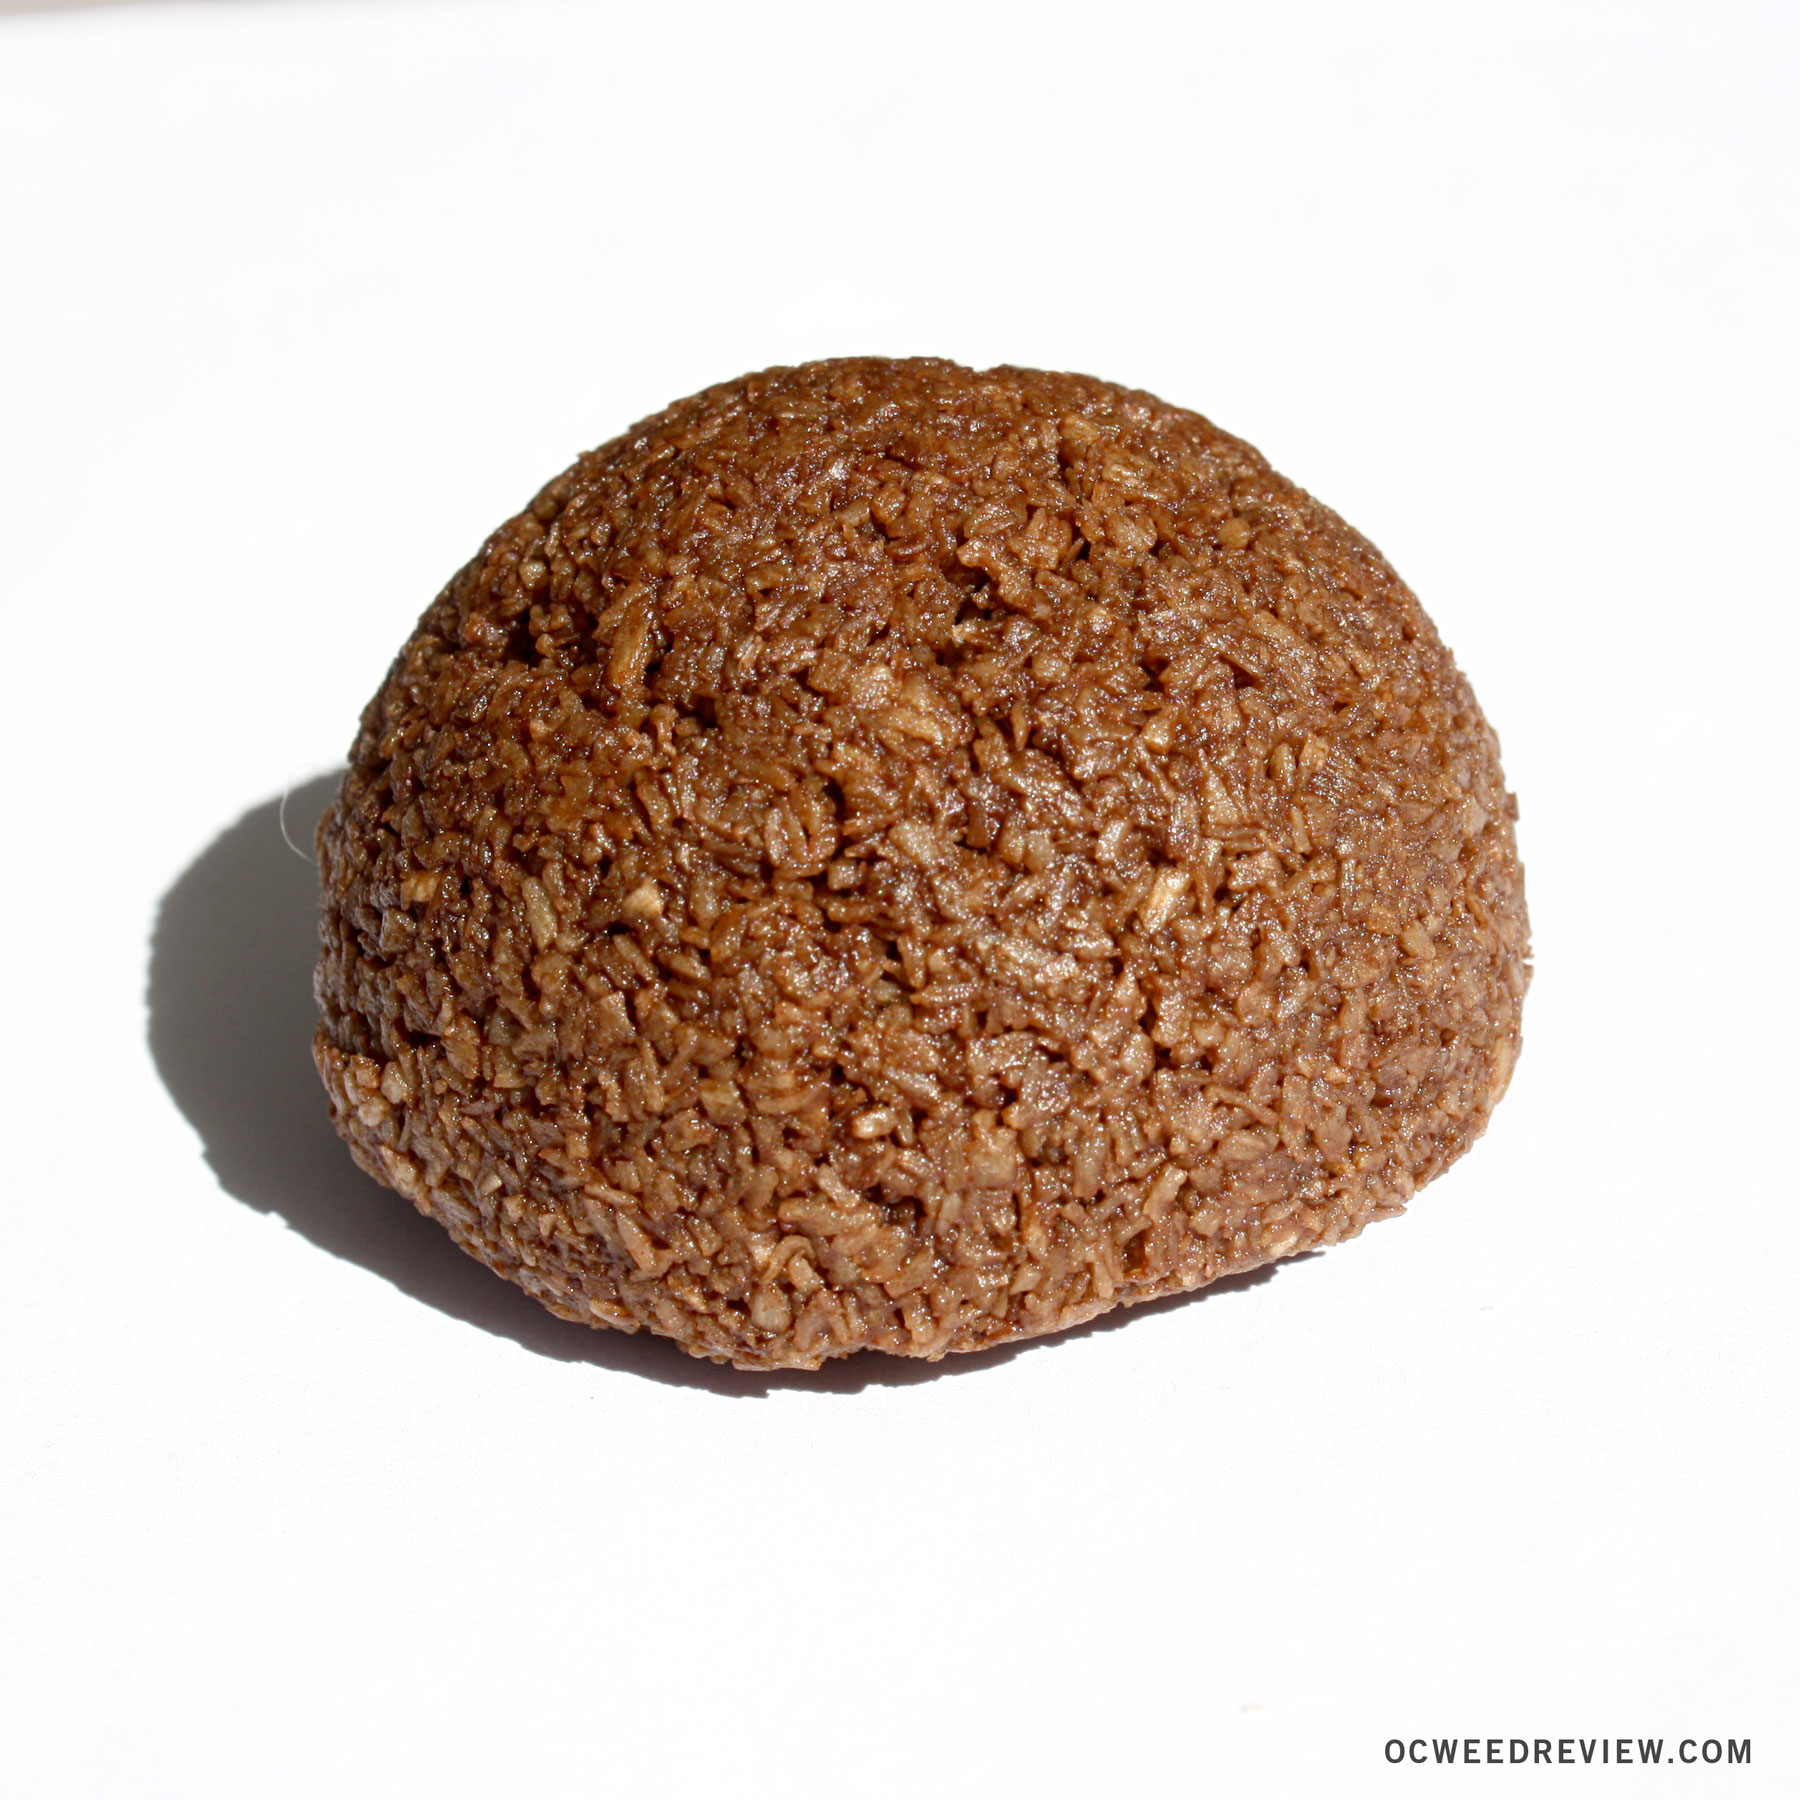 Healthy High's Cacao Macaroon Edible Review